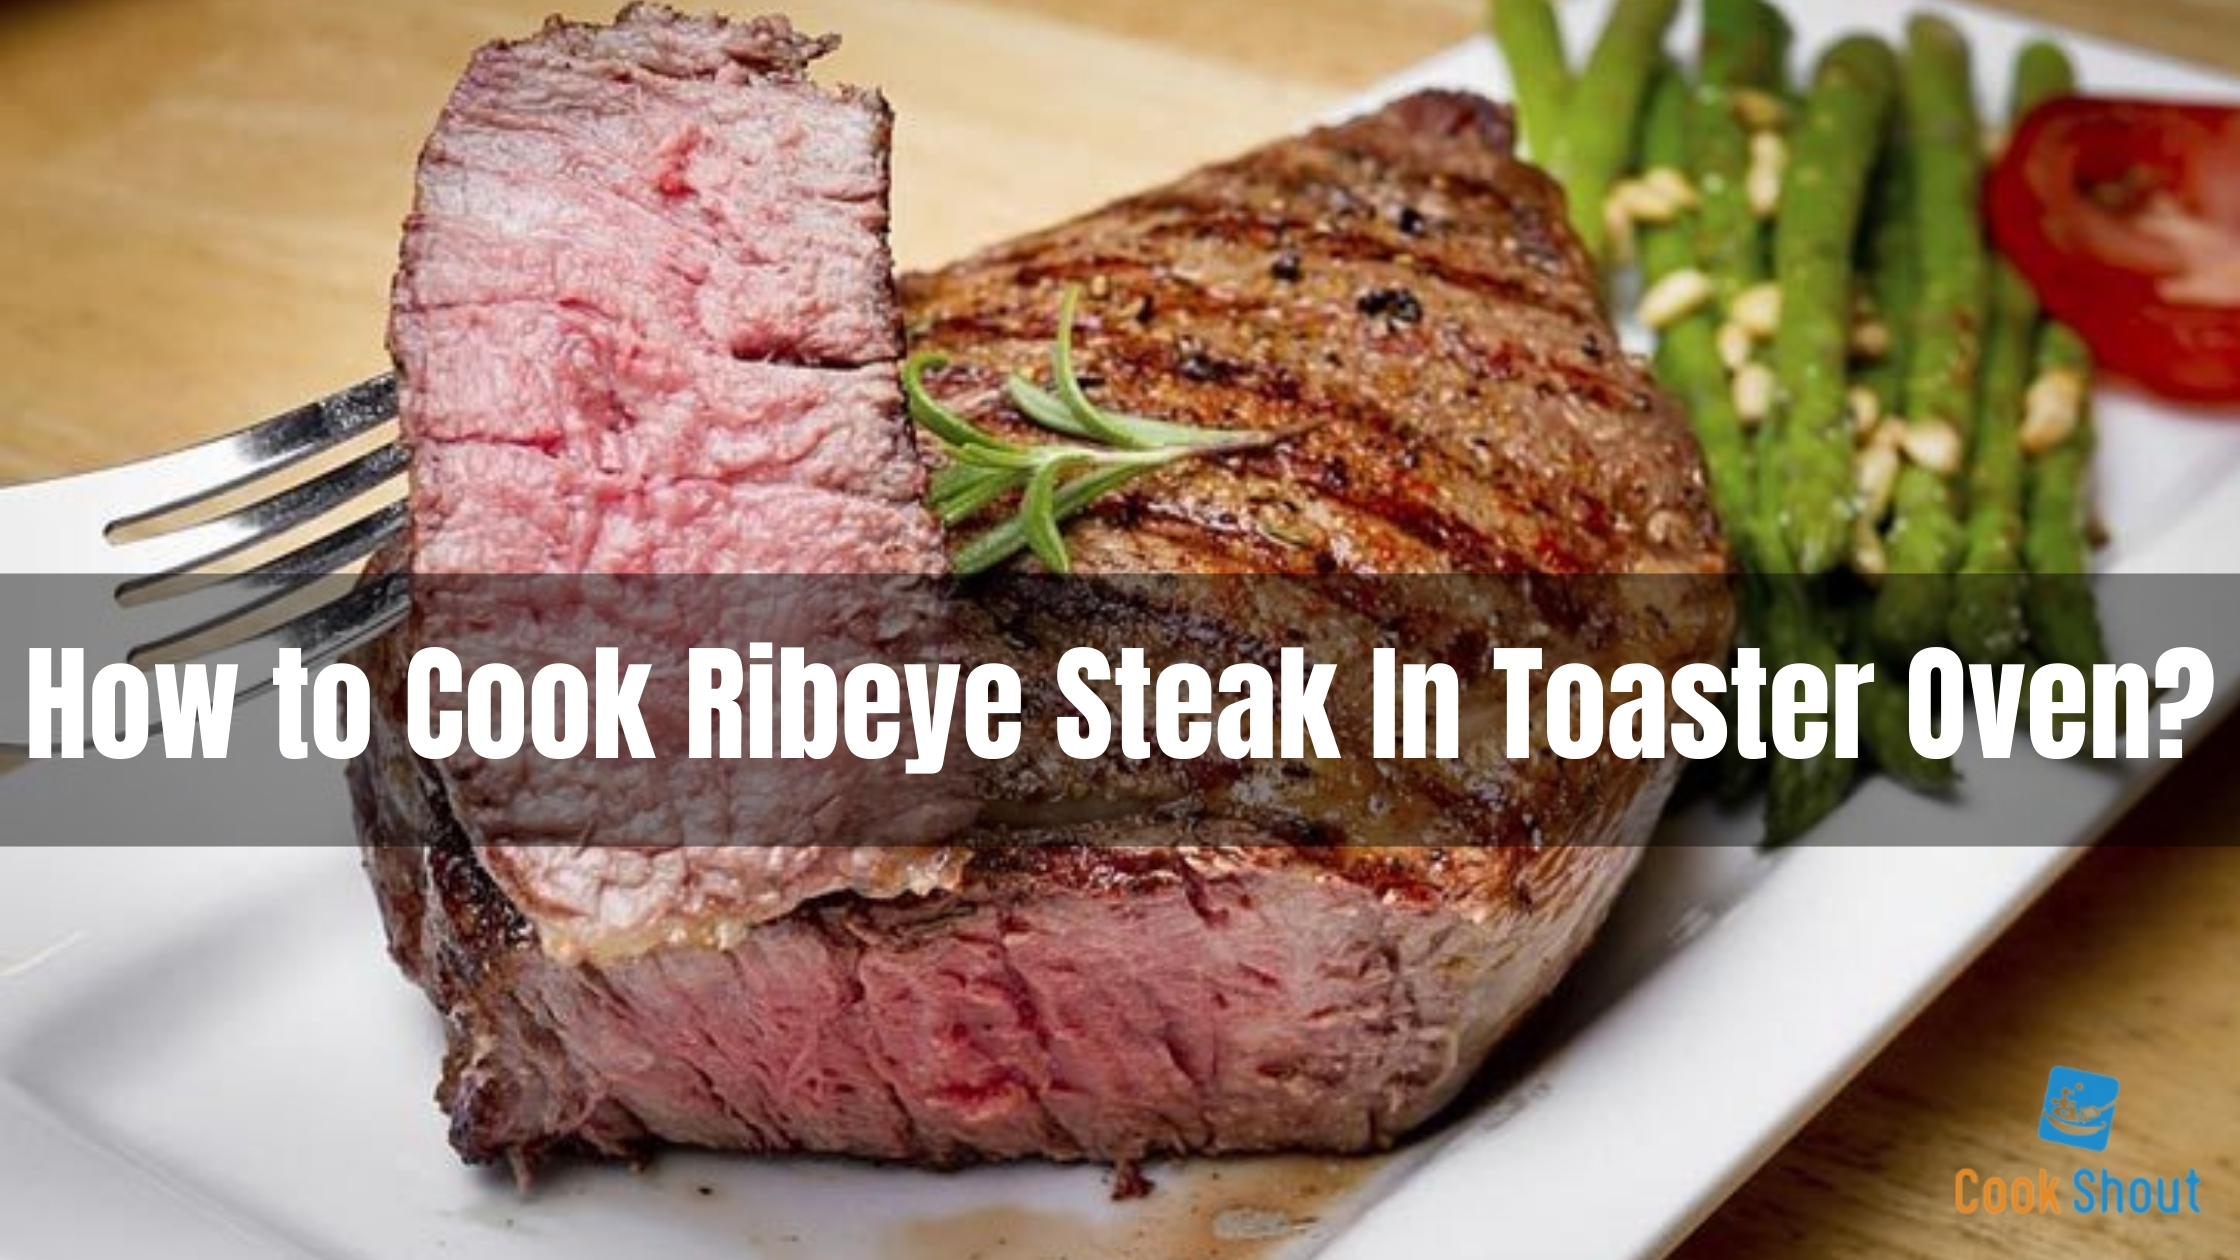 How to Cook Ribeye Steak In Toaster Oven?